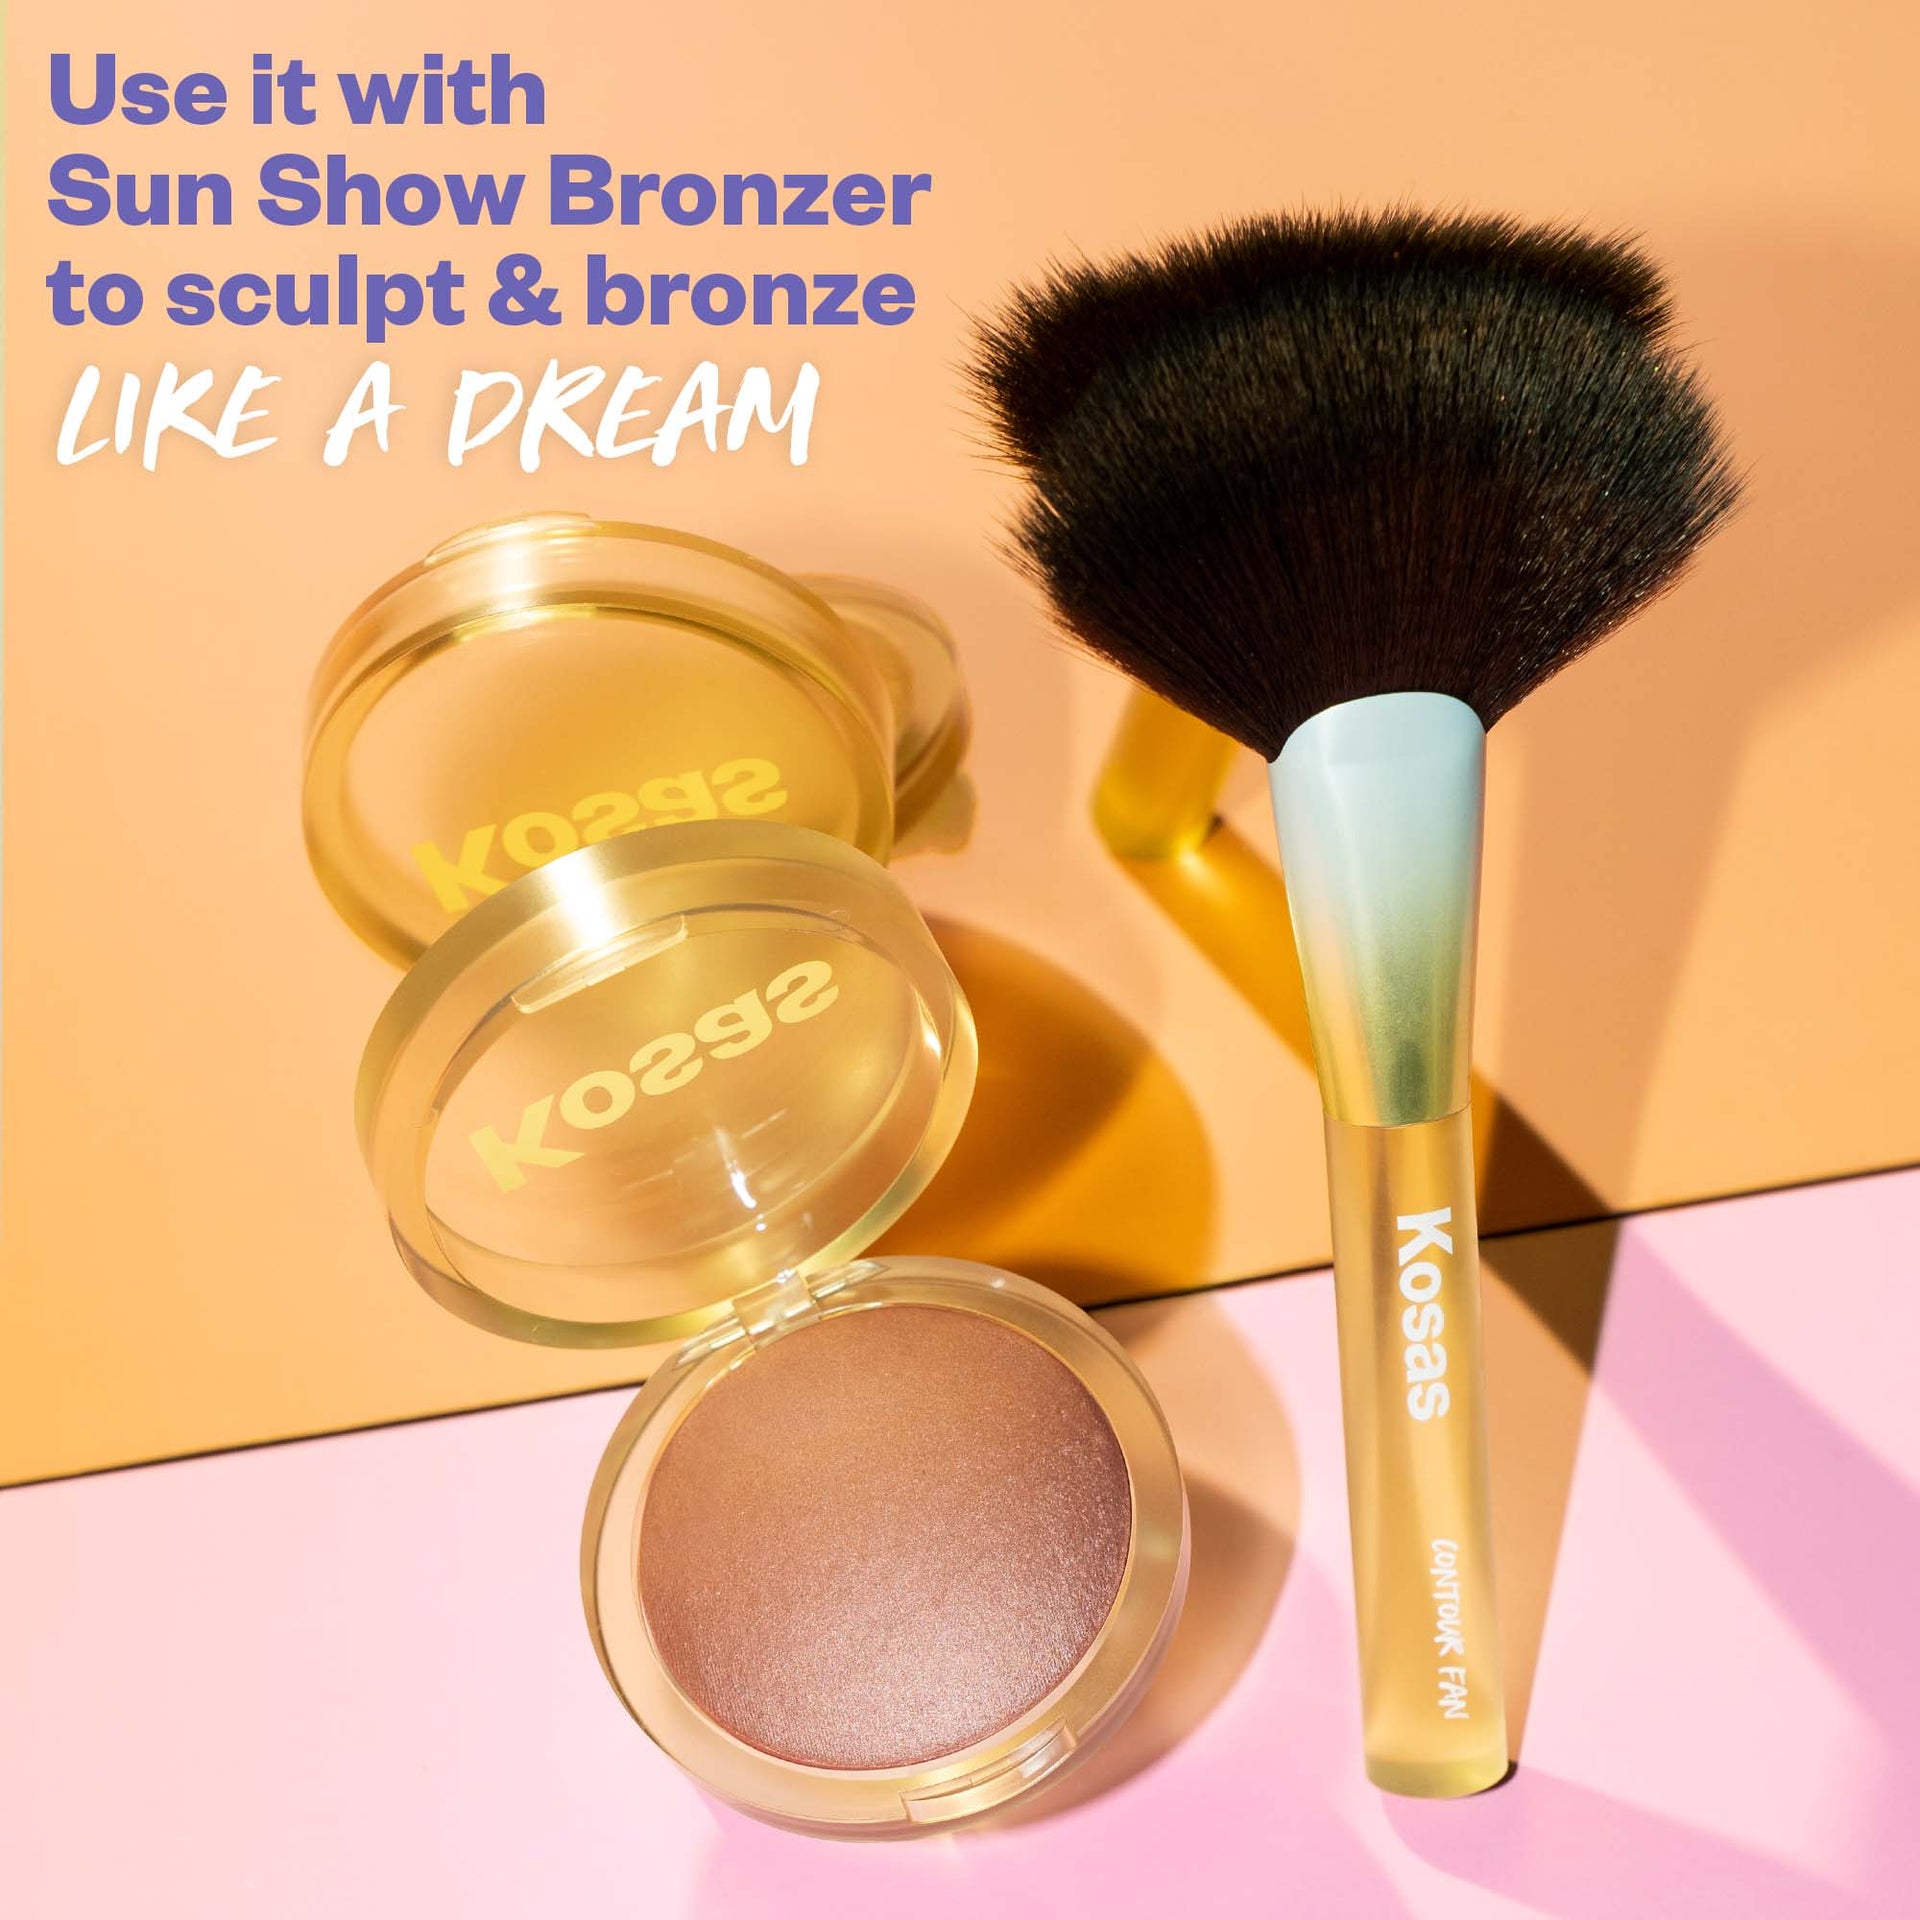 Use with Sun Show Bronzer